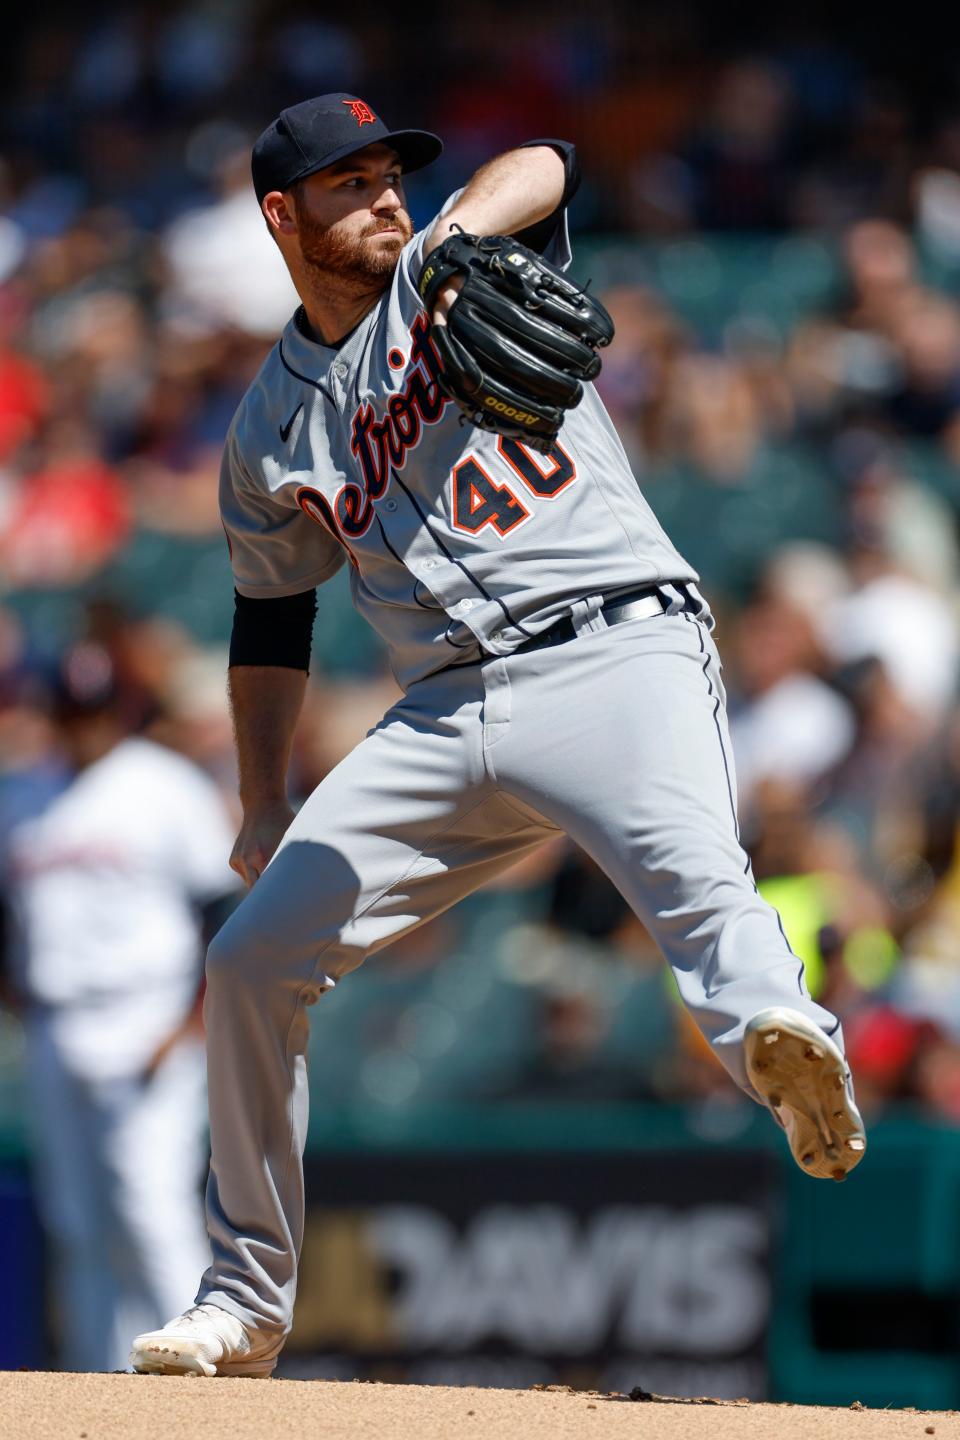 Tigers starting pitcher Drew Hutchison delivers against the Guardians during the first inning in the first game of a doubleheader, Monday, Aug. 15, 2022, in Cleveland.